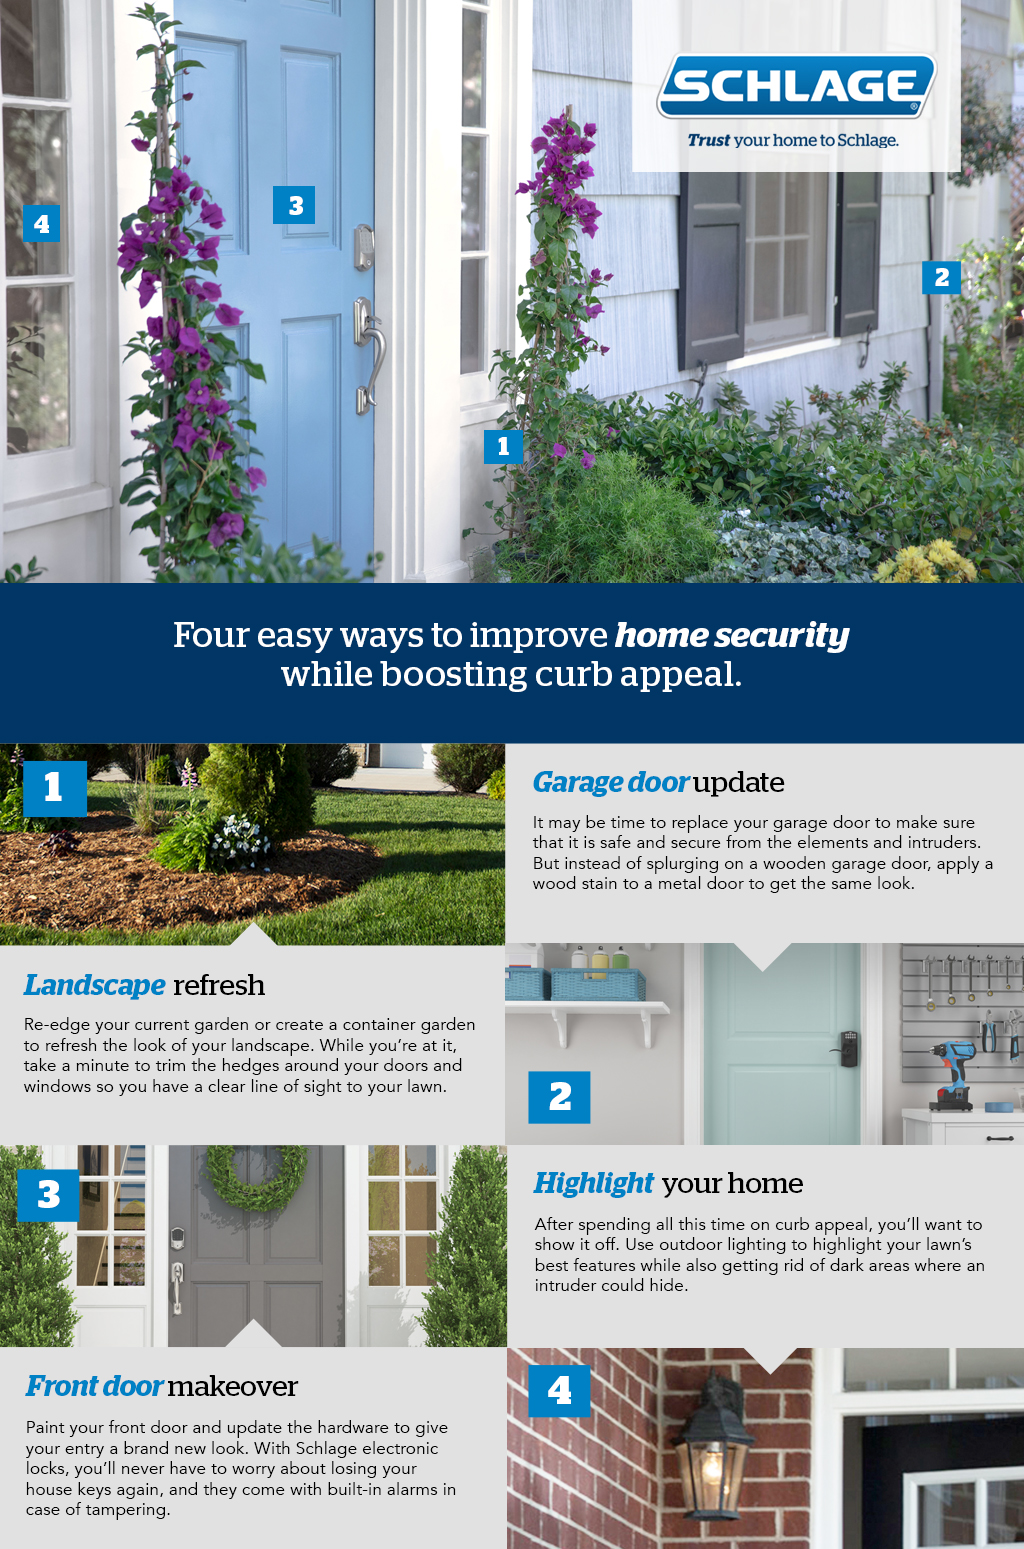 Four easy ways to improve home security while boosting curb appeal | Schlage